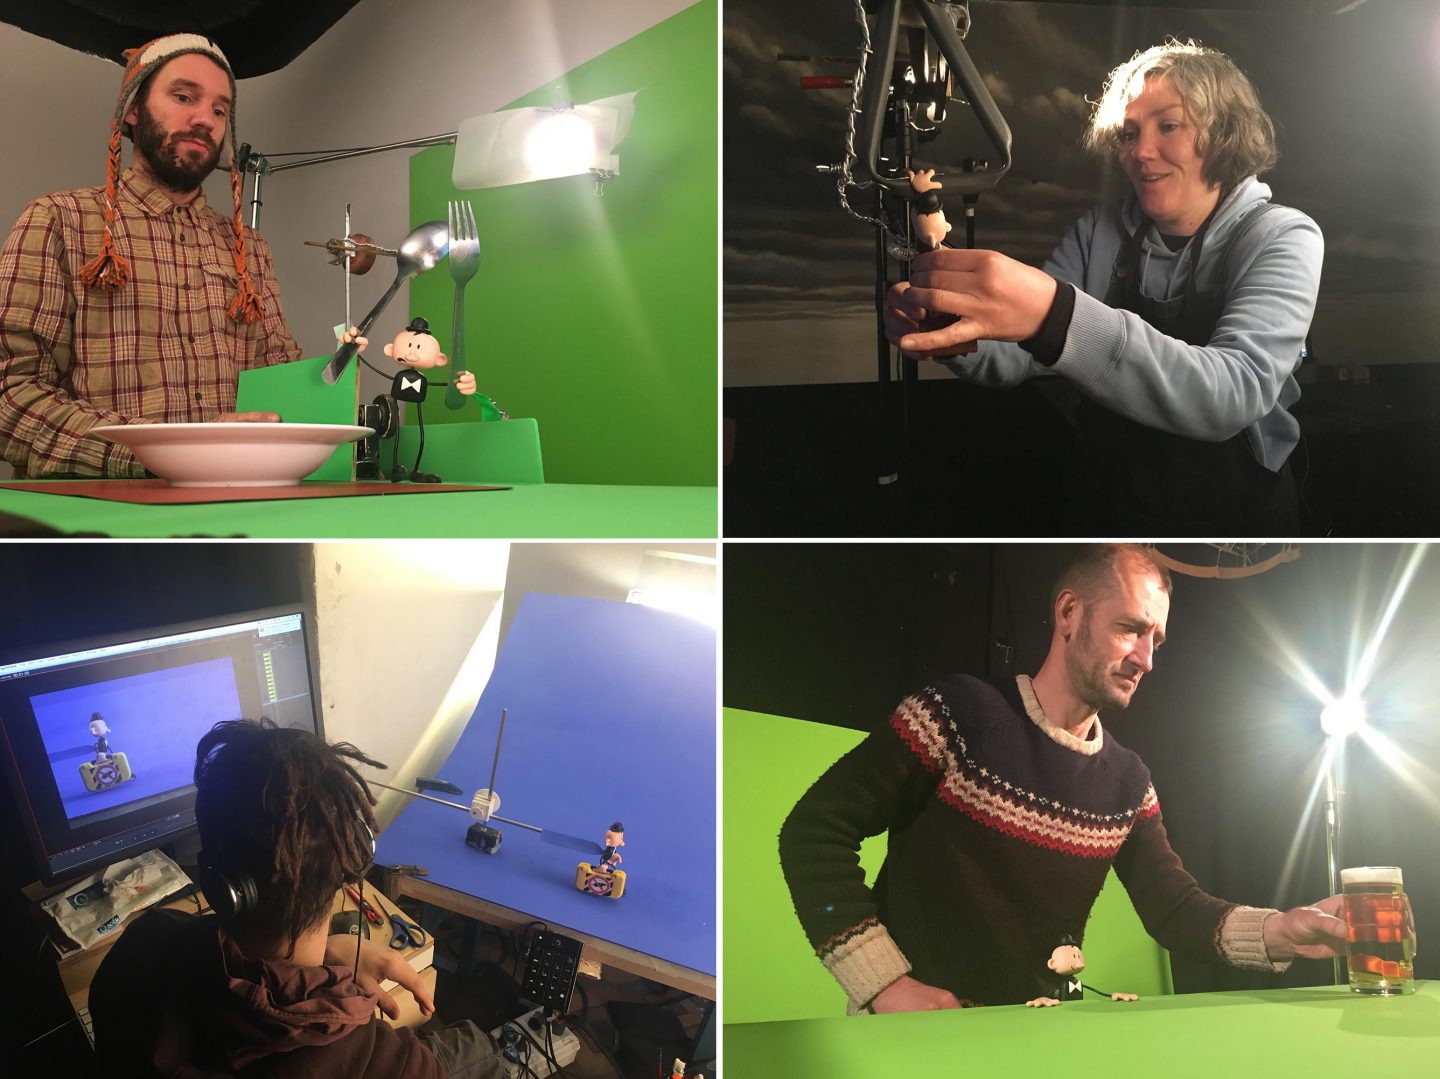 'Tiniest Man" animators (clockwise from upper left): Mariano Bergara, Souad Wedell, Gilles Coirier, Becho Lo Bianco.